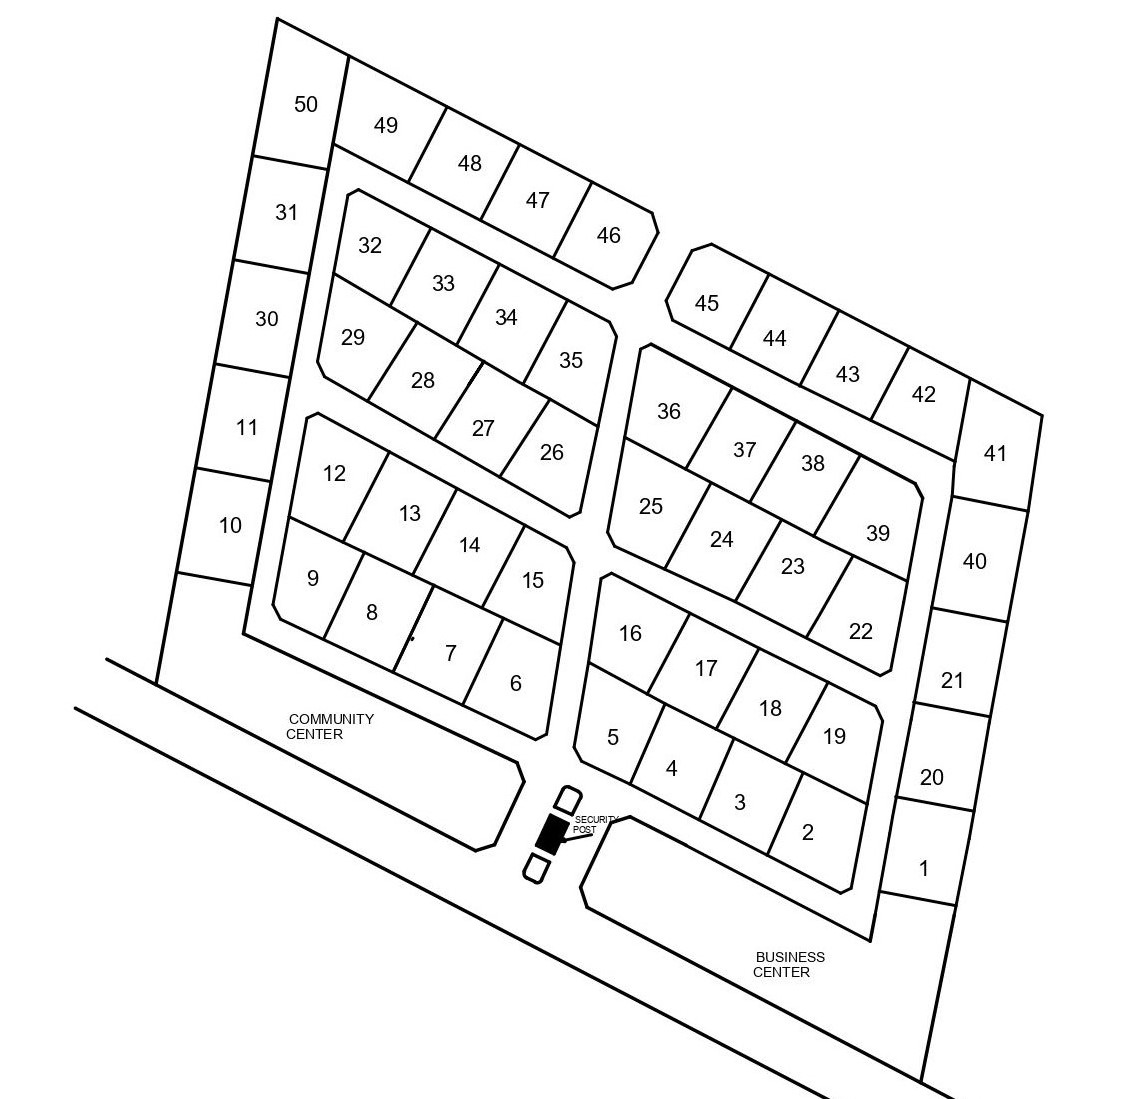 50_Plots_Site_Layout_15_Acres_Phase_1_Land_Survey_for_Black_Star_Pan-African_community.jpg